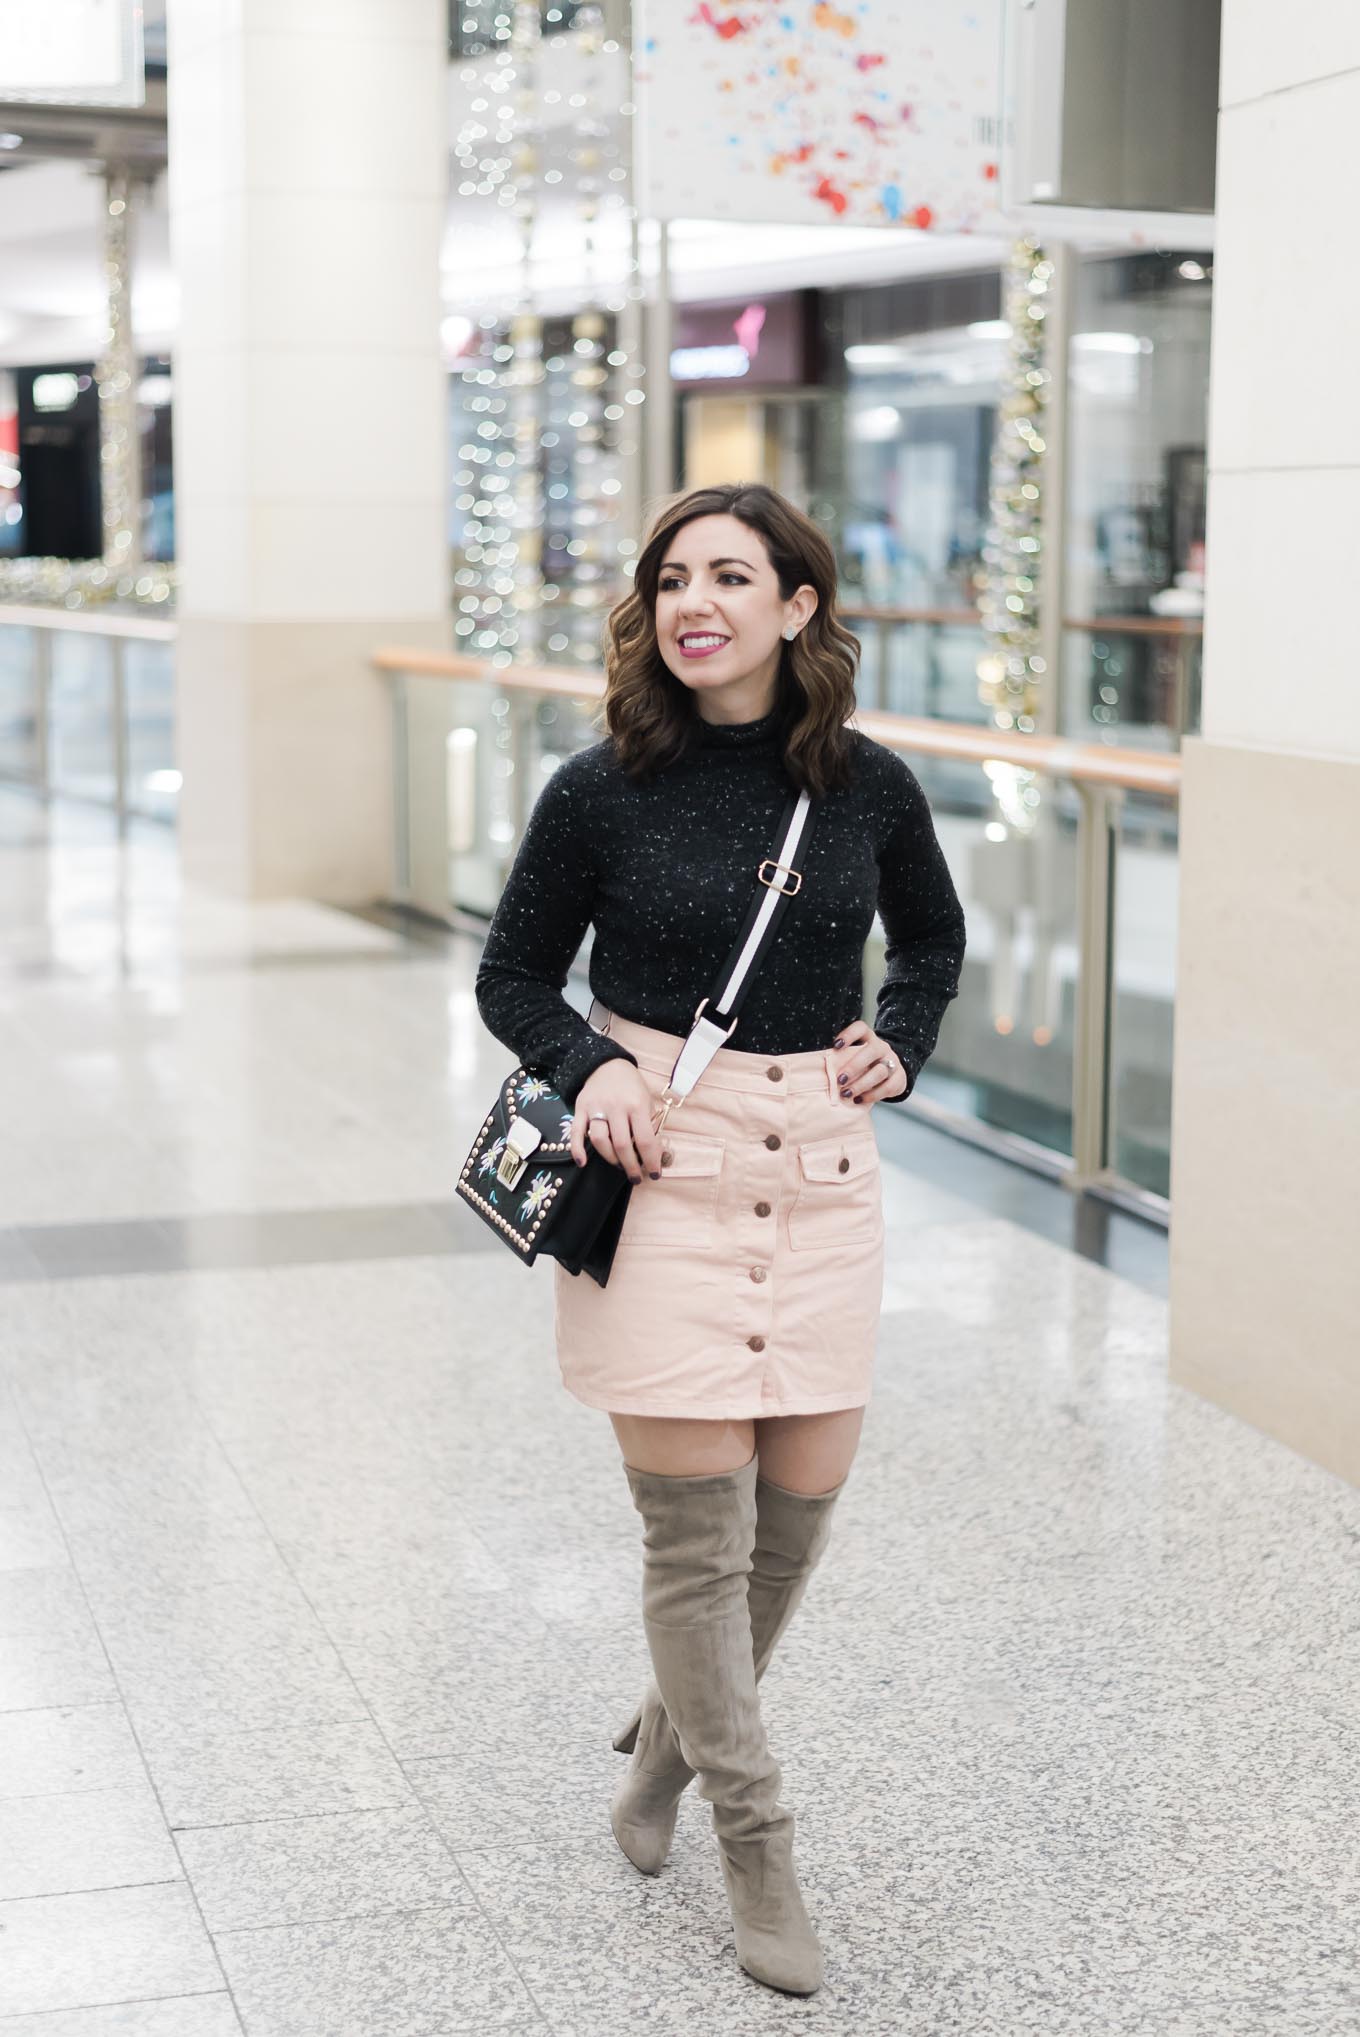 Lifestyle blogger Roxanne of Glass of Glam wearing a MINKPINK denim skirt, otk boots, a Madewell sweater, pom hat, and a rivet crossbody bag